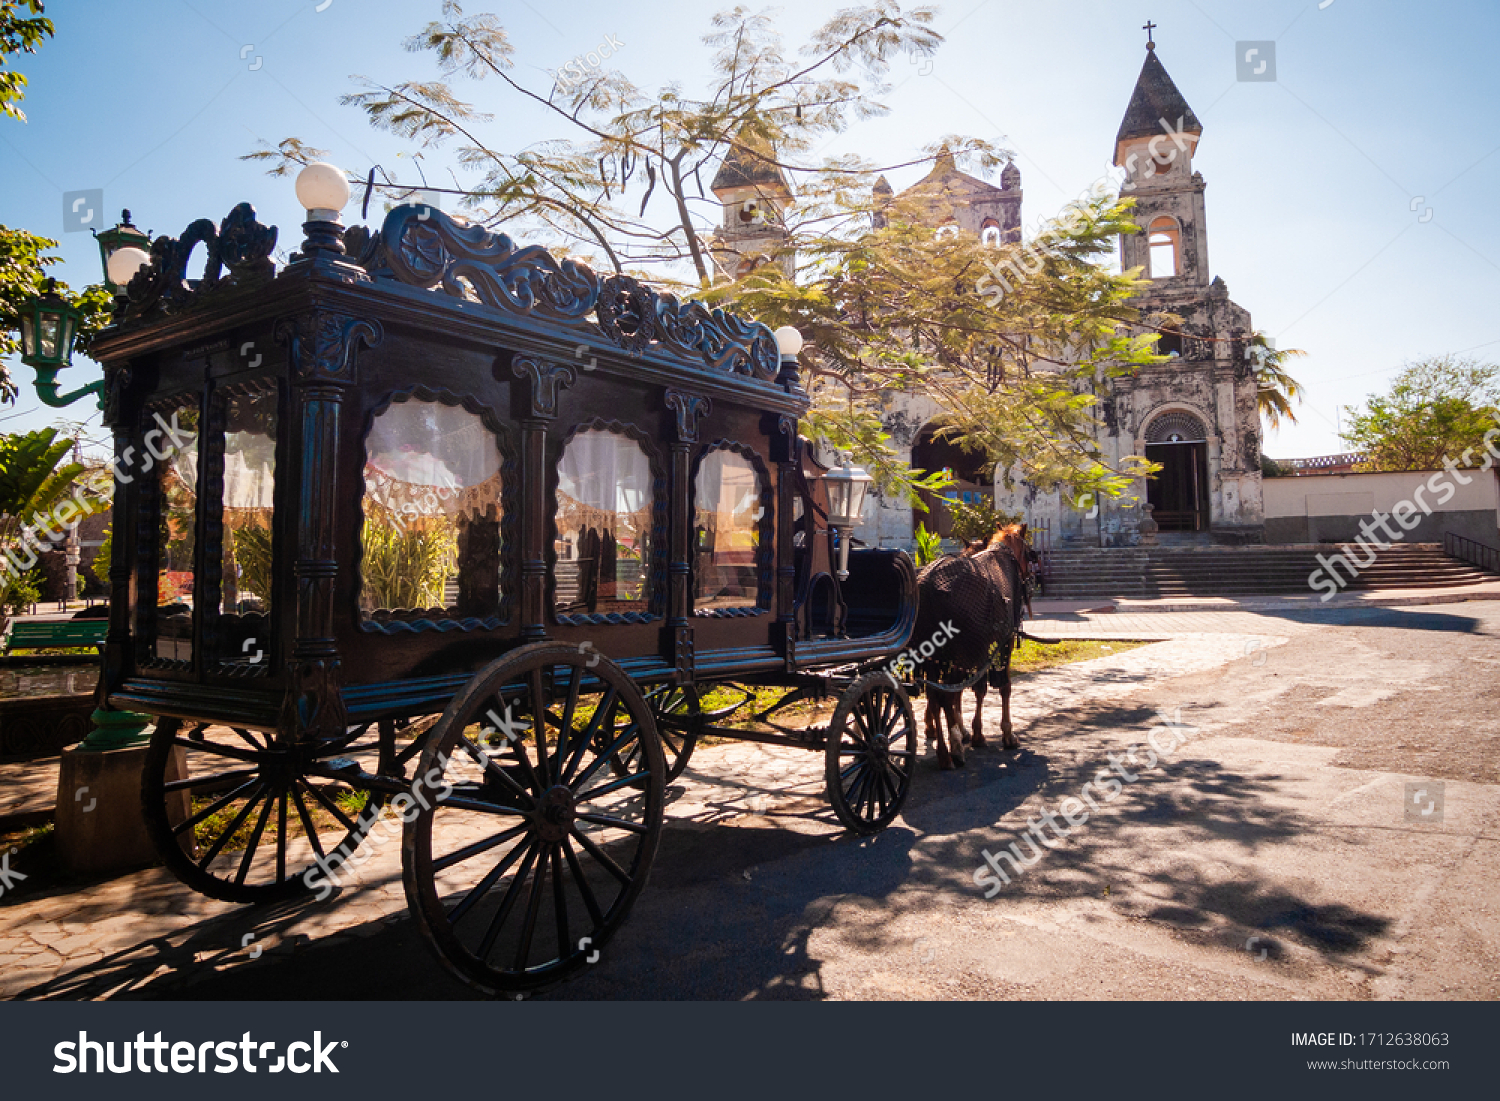 Funeral carriage with horse in front of old church, old horse carriage to carry coffins #1712638063